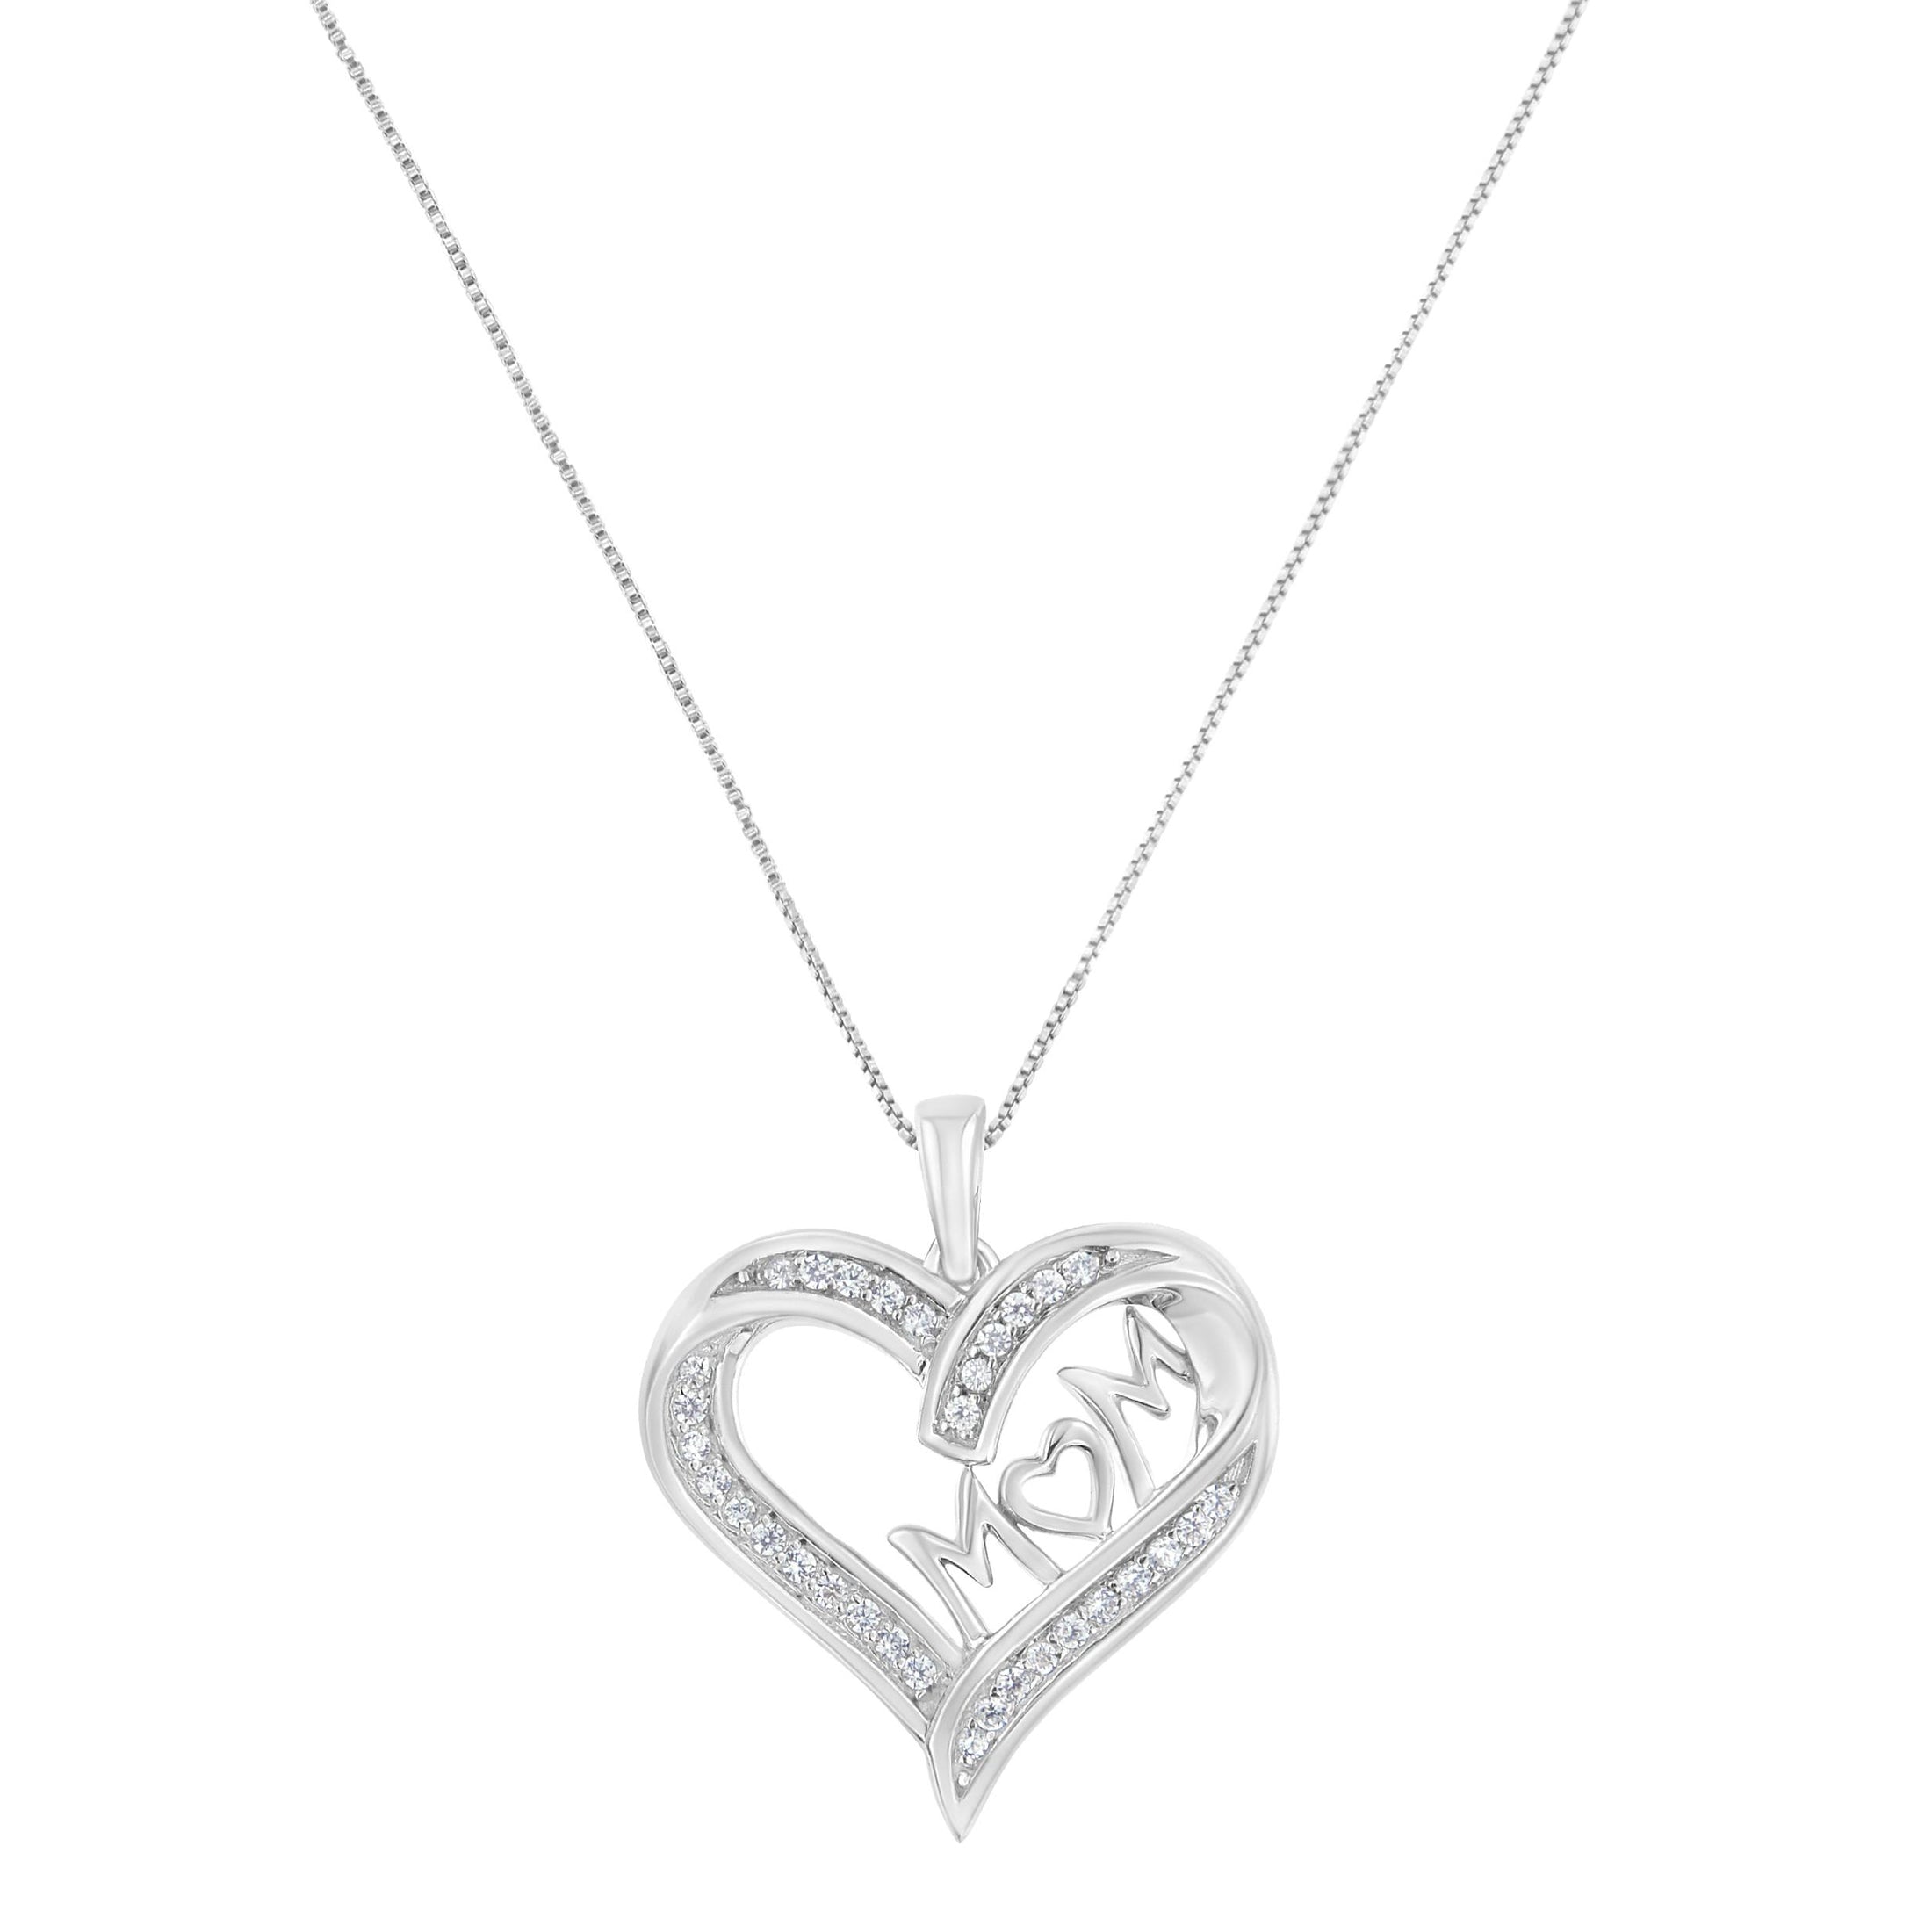 .925 Sterling Silver 1/4 cttw Diamond Engraved "Mom" in Heart Pendant Necklace